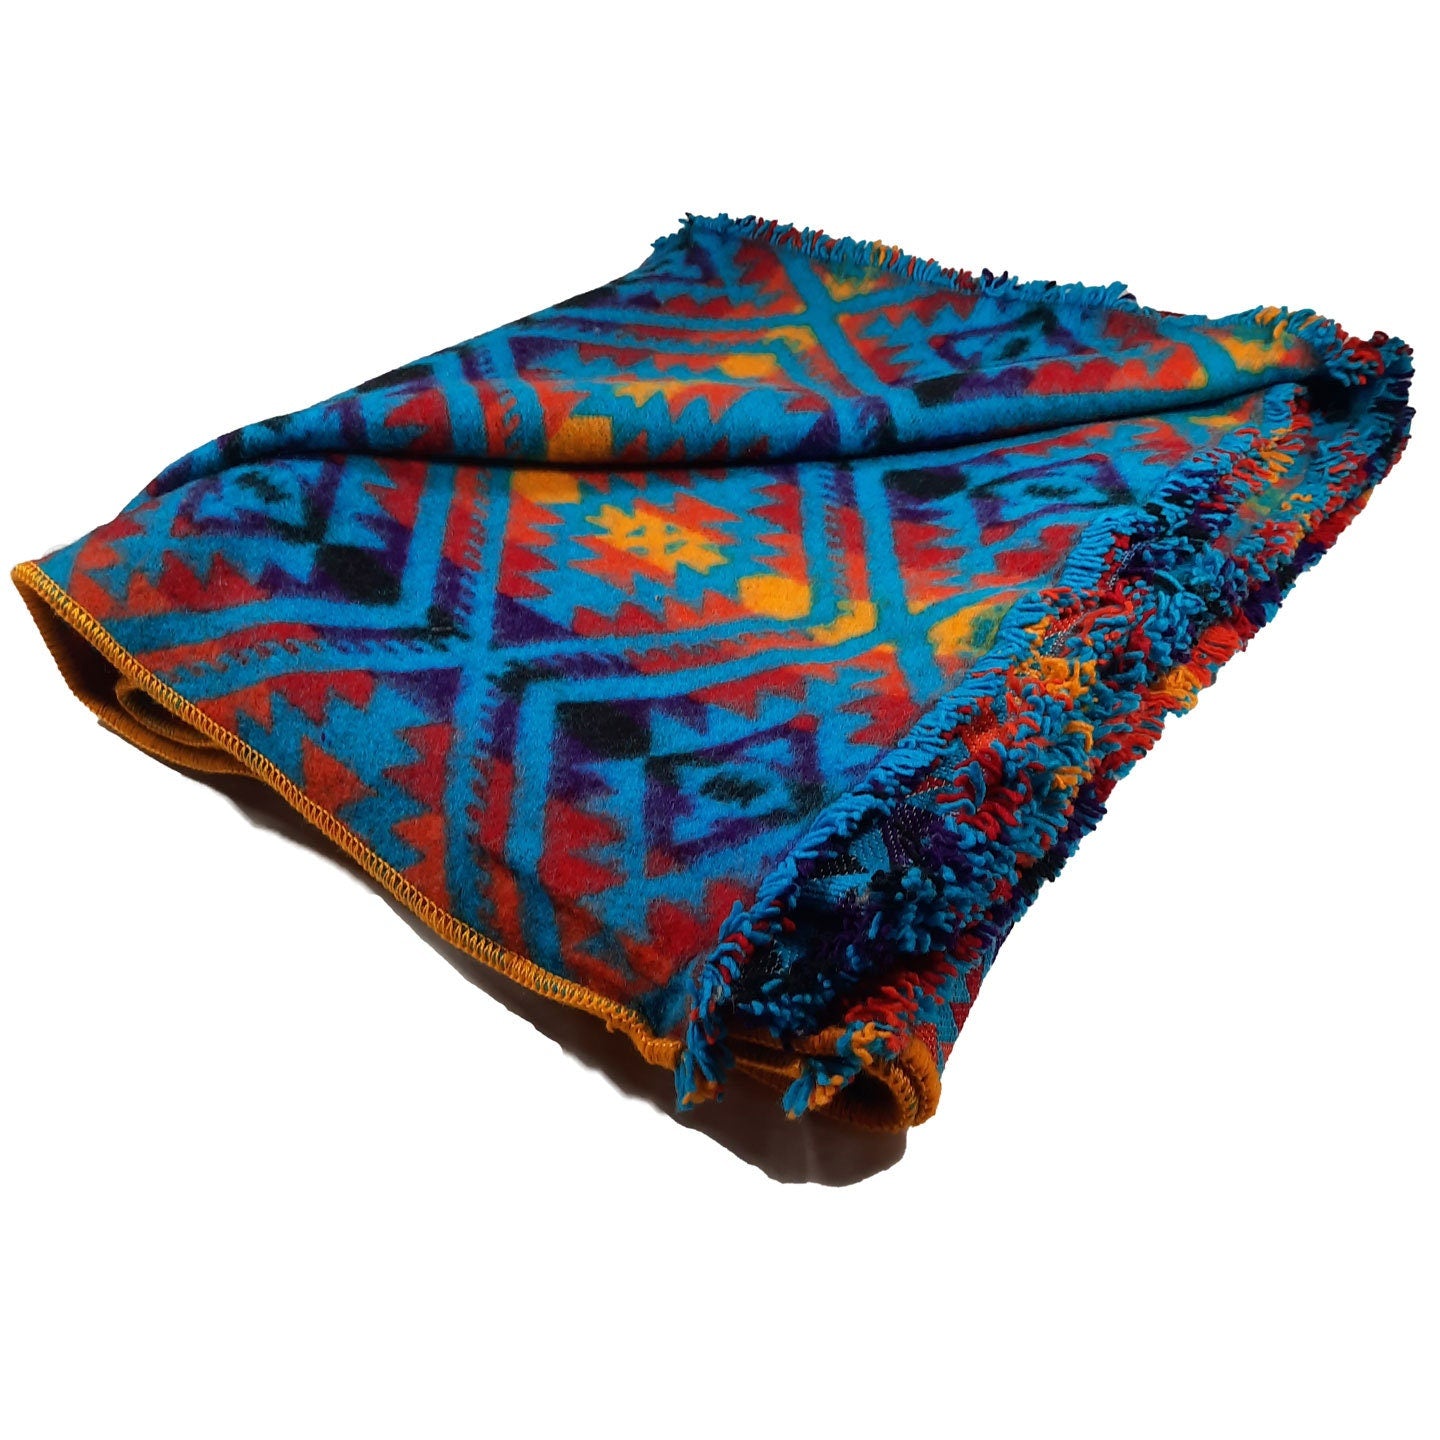 Sheep Wool Blanket | Woven Boho Hippie Bedding | Couch Cover | Warm Queen Size Blanket | Weighted Throw Blanket | Blue Red